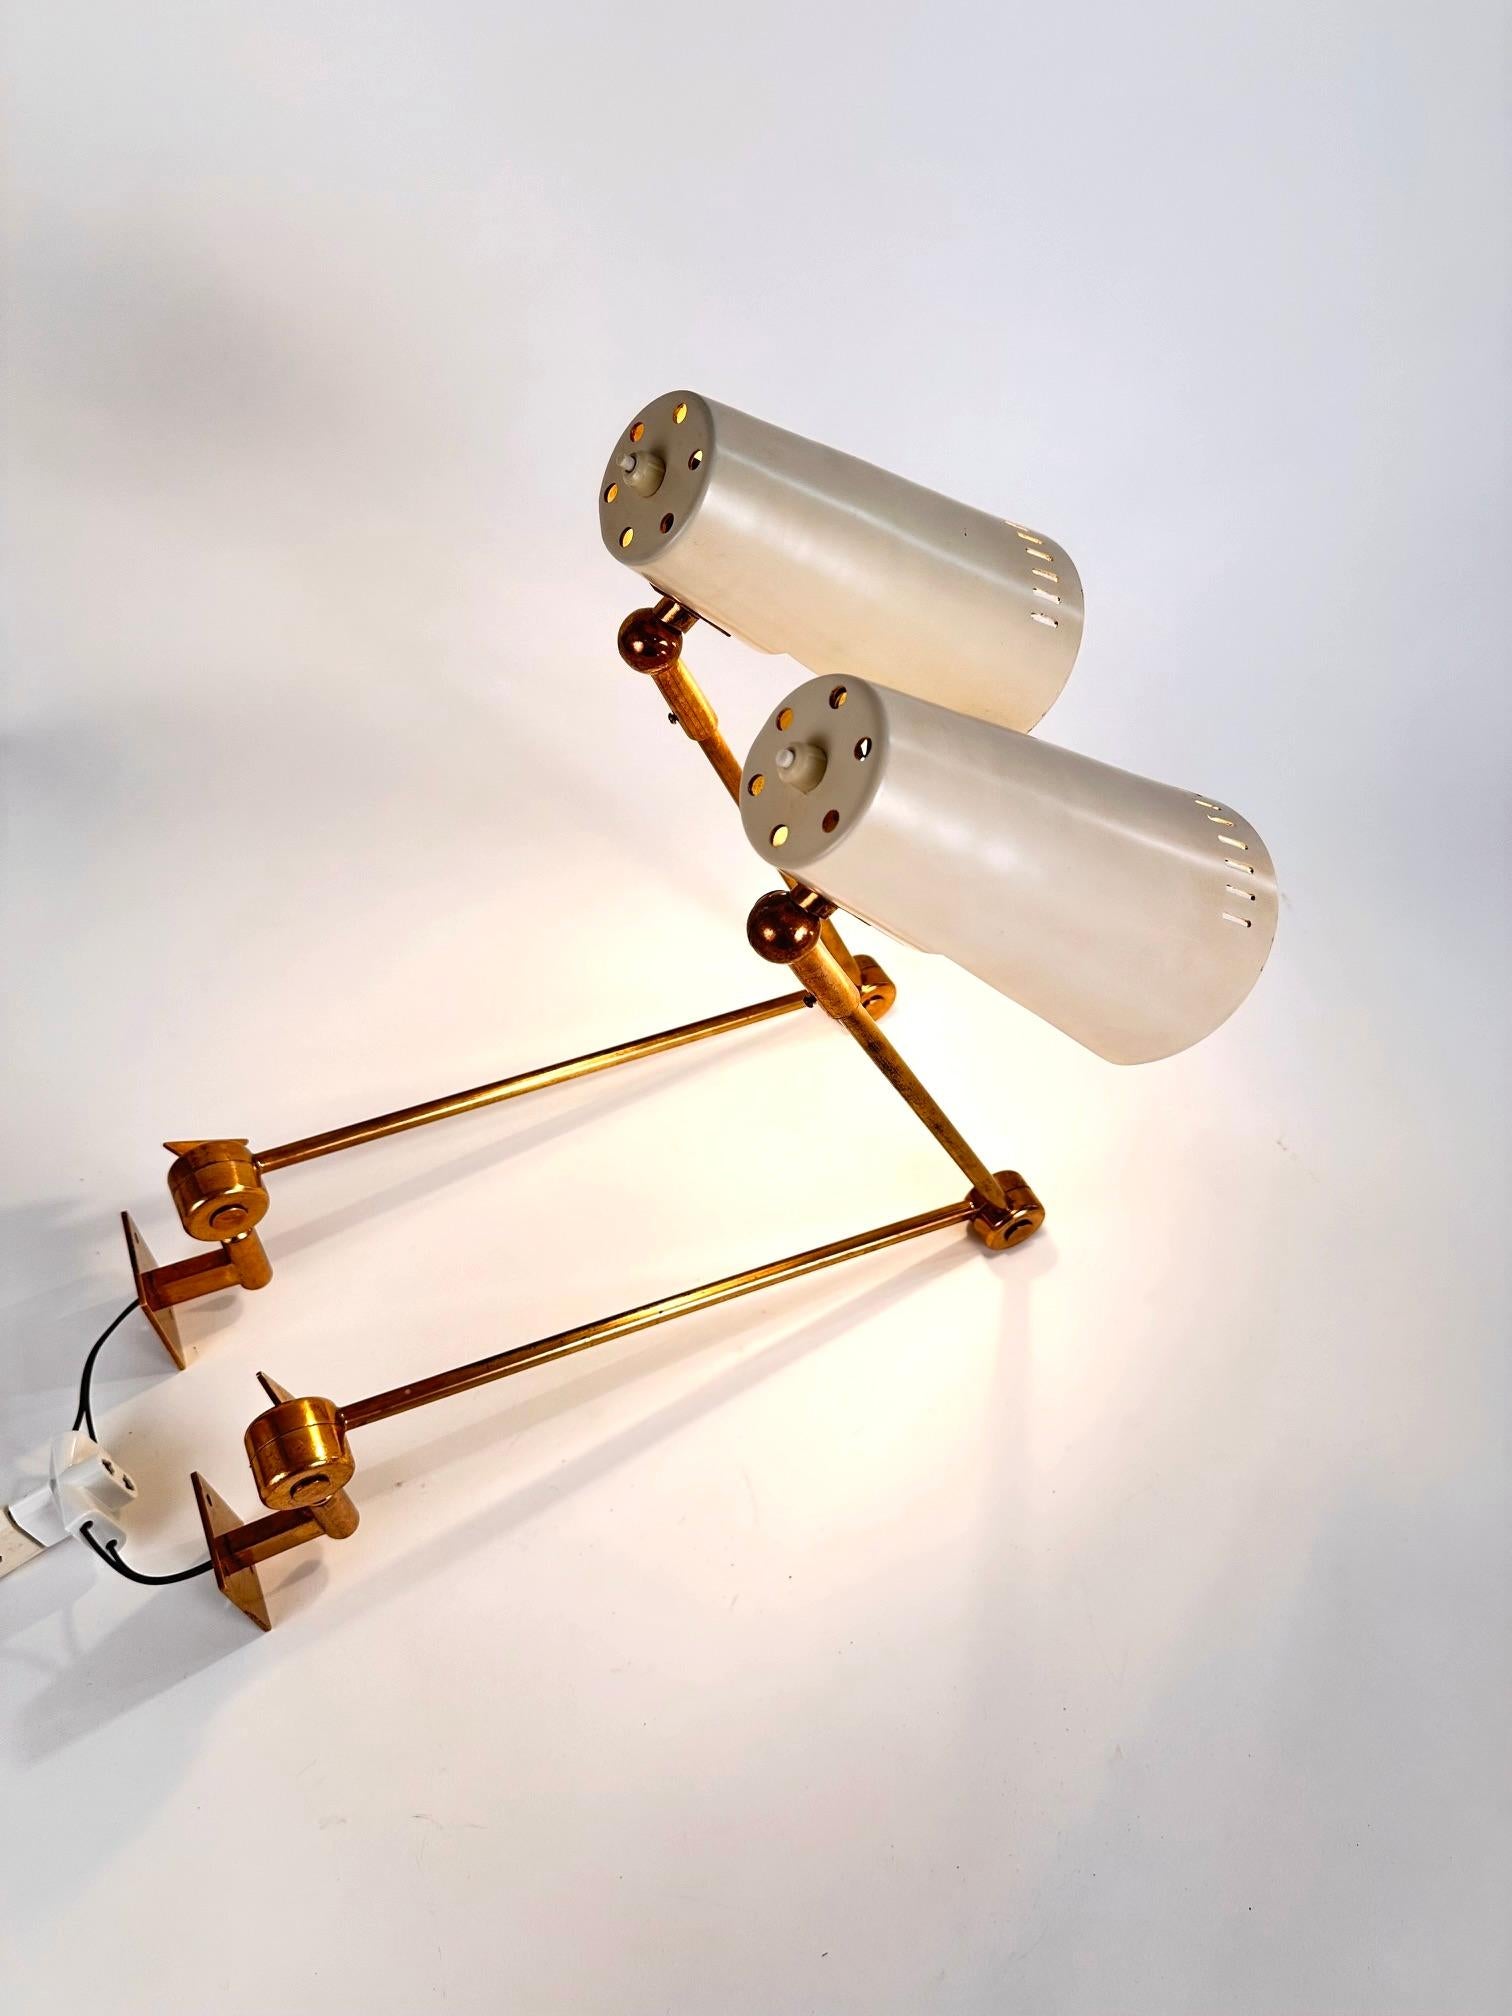 An original pair of  fully articulated original Stilnovo  wall lamps.(marked Stilnovo).. Italy 1960 .Solid brass adjustable arms ,which could rotate and adjust to several positions according to purpose.The lamps have an original white finished shade